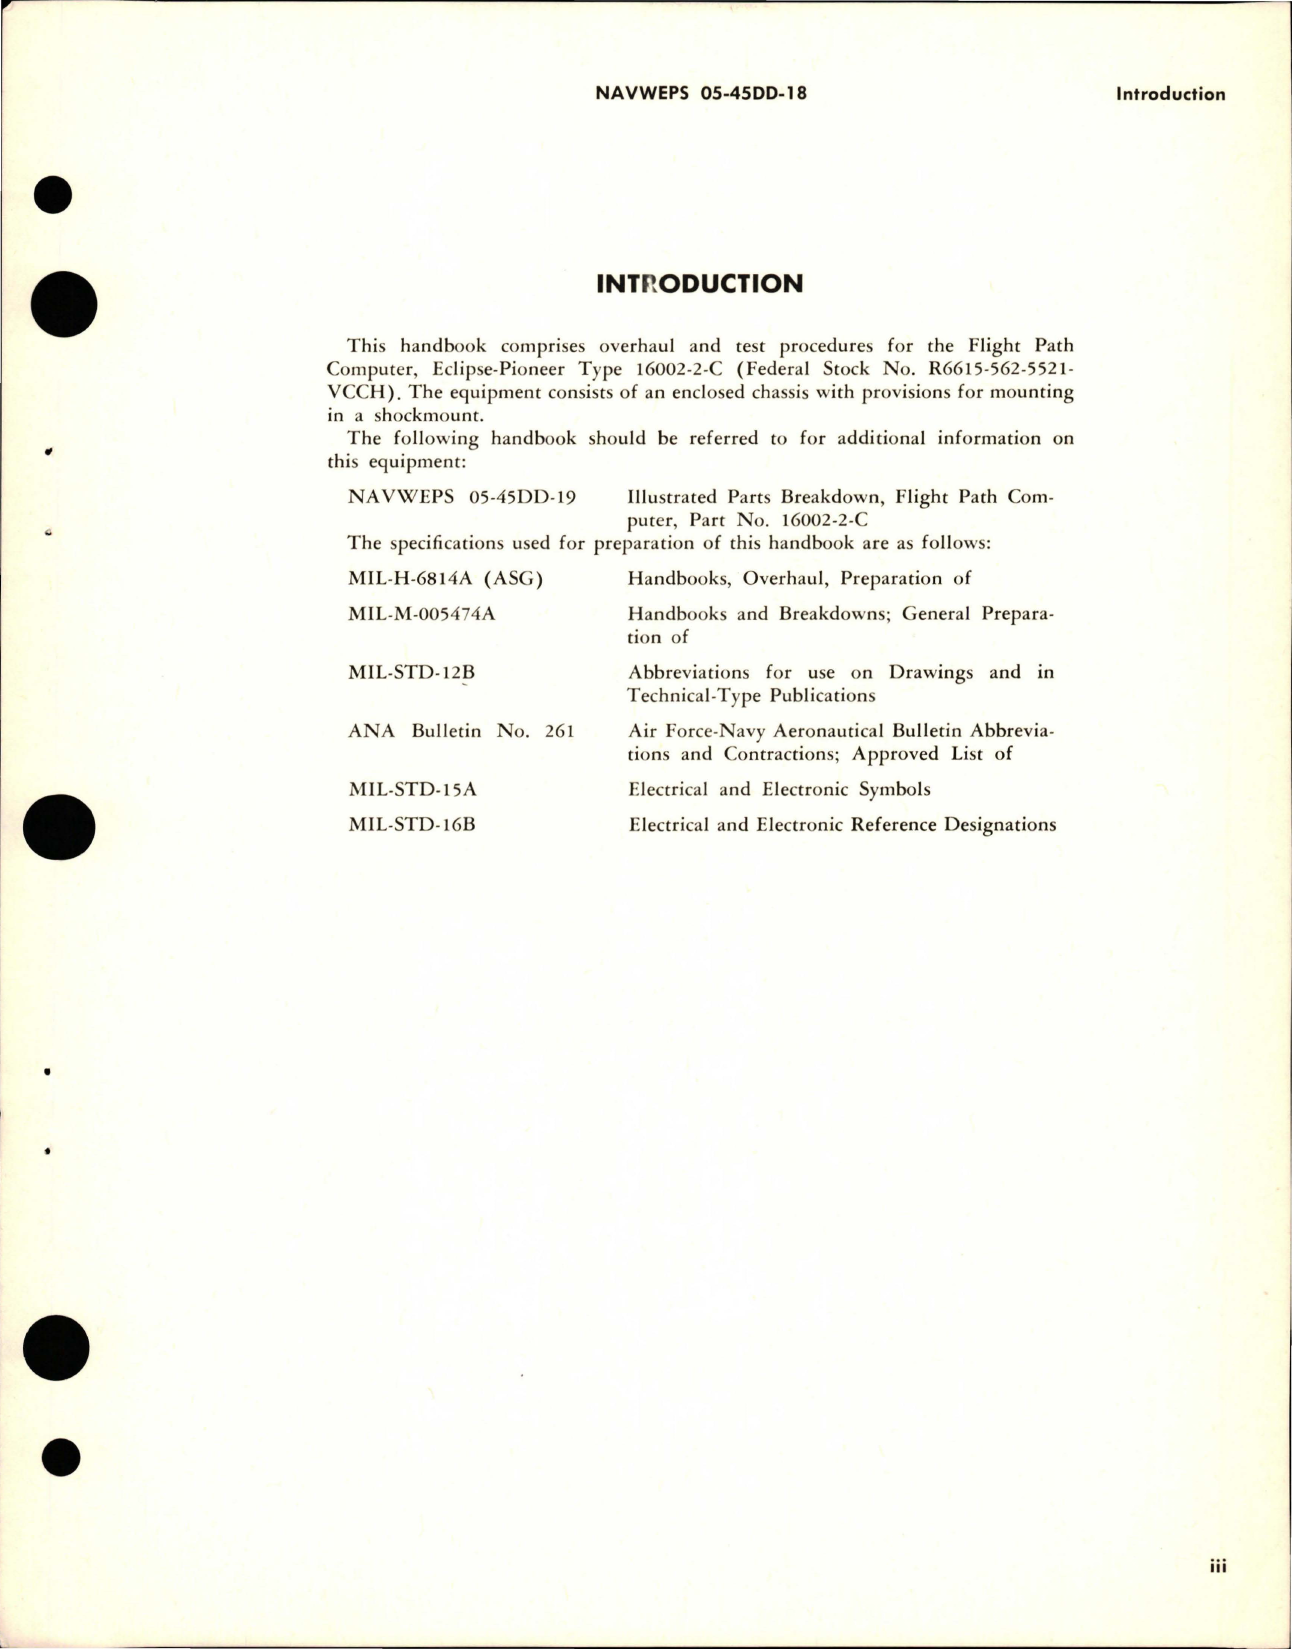 Sample page 5 from AirCorps Library document: Overhaul Instructions for Flight Path Computer - Part 16002-2-C